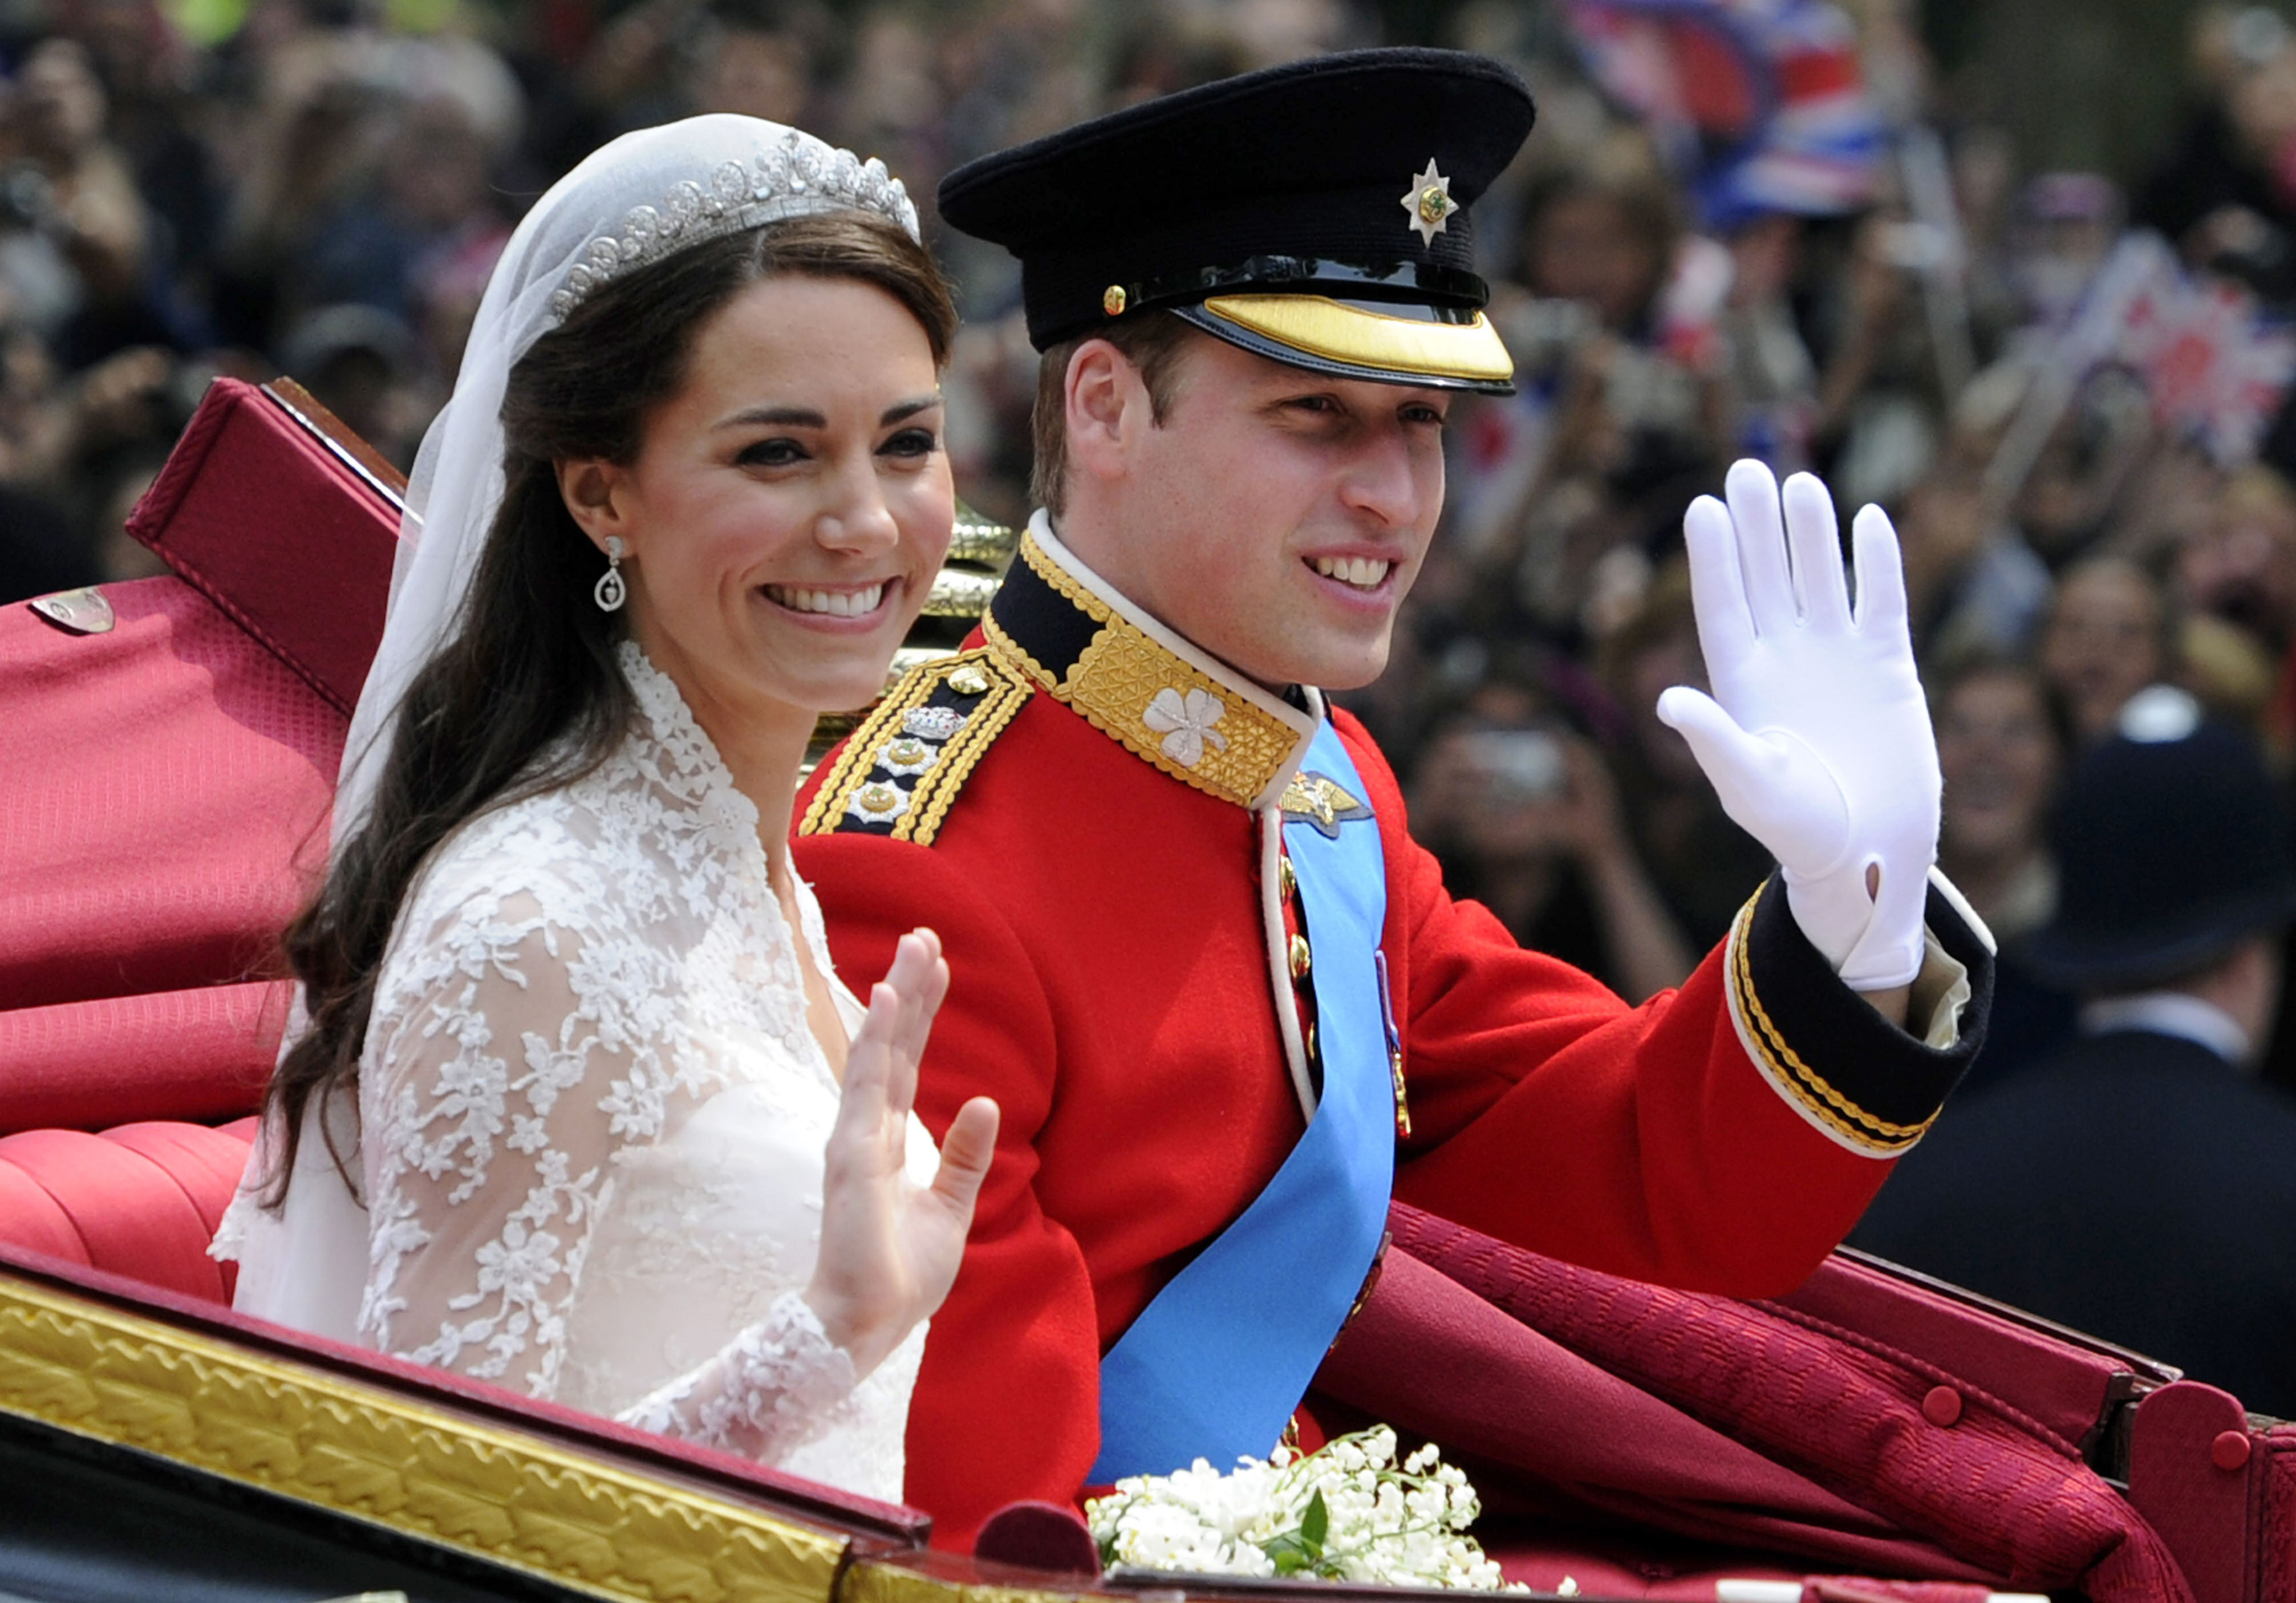 Britain's Prince William and his wife Catherine, Duchess of Cambridge, wave as they leave Westminster Abbey to Buckingham Palace in the 1902 State Landau, along the Procession Route, after their wedding in Westminster Abbey, Central London, April 29, 2011.